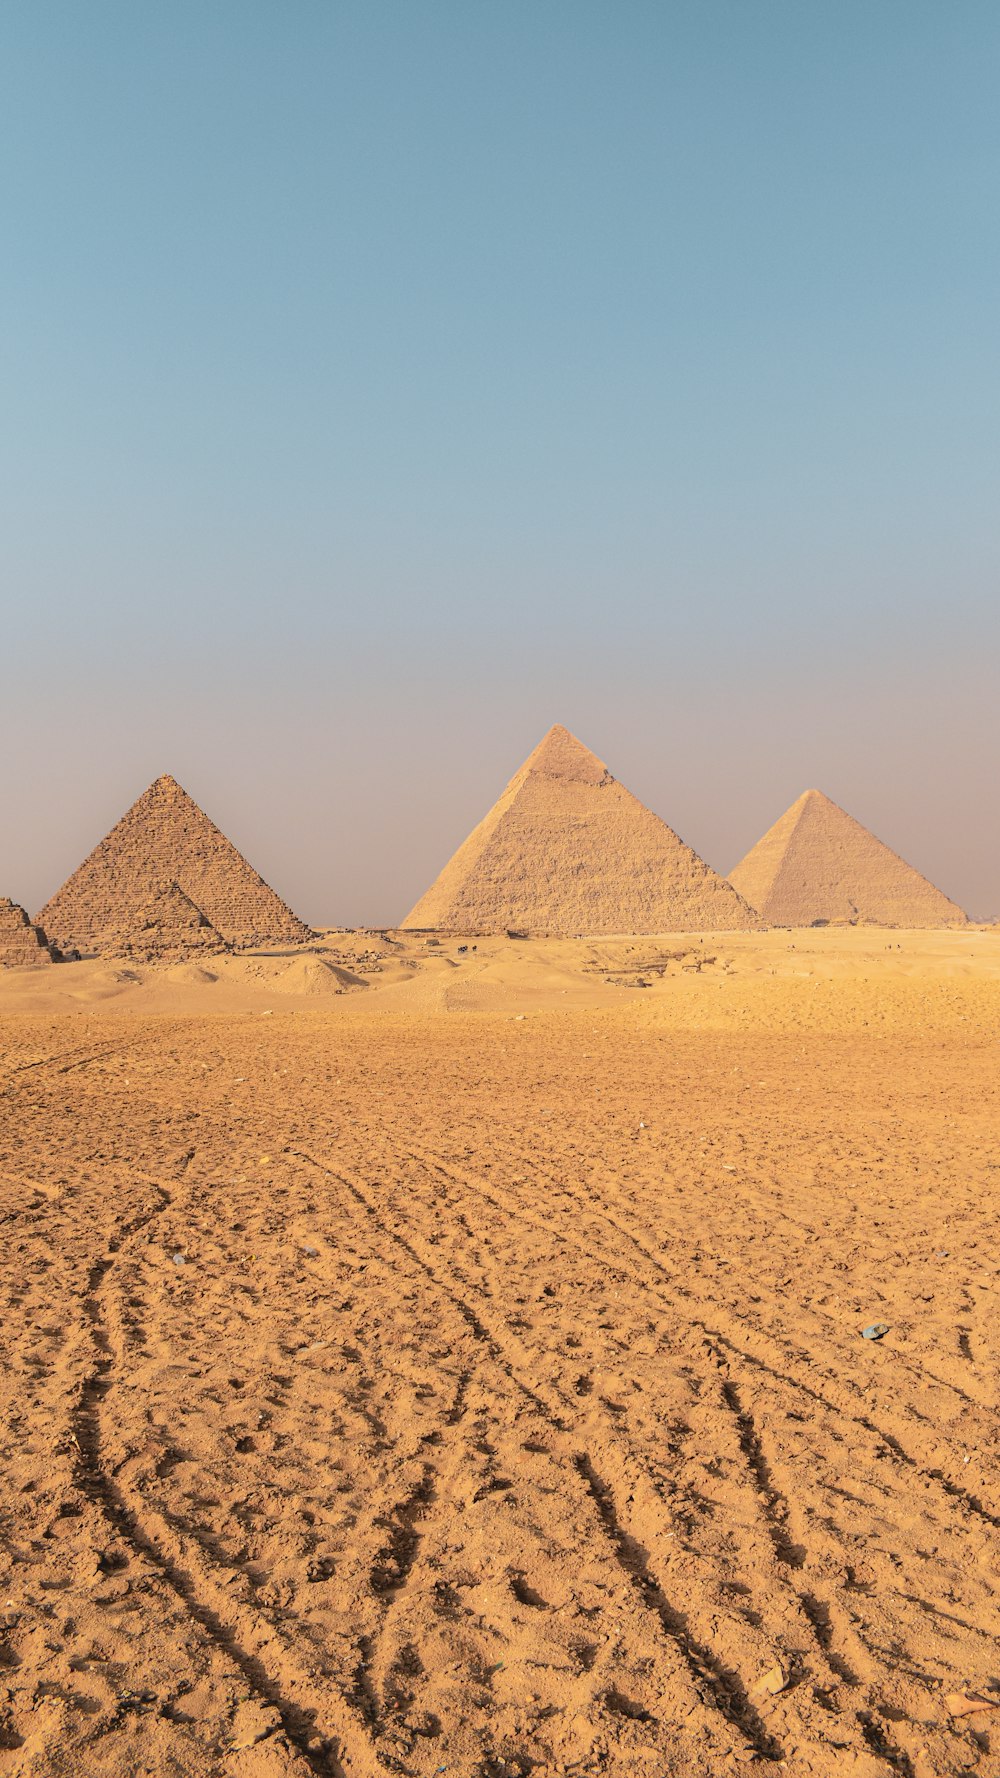 three pyramids in the desert with tracks in the sand